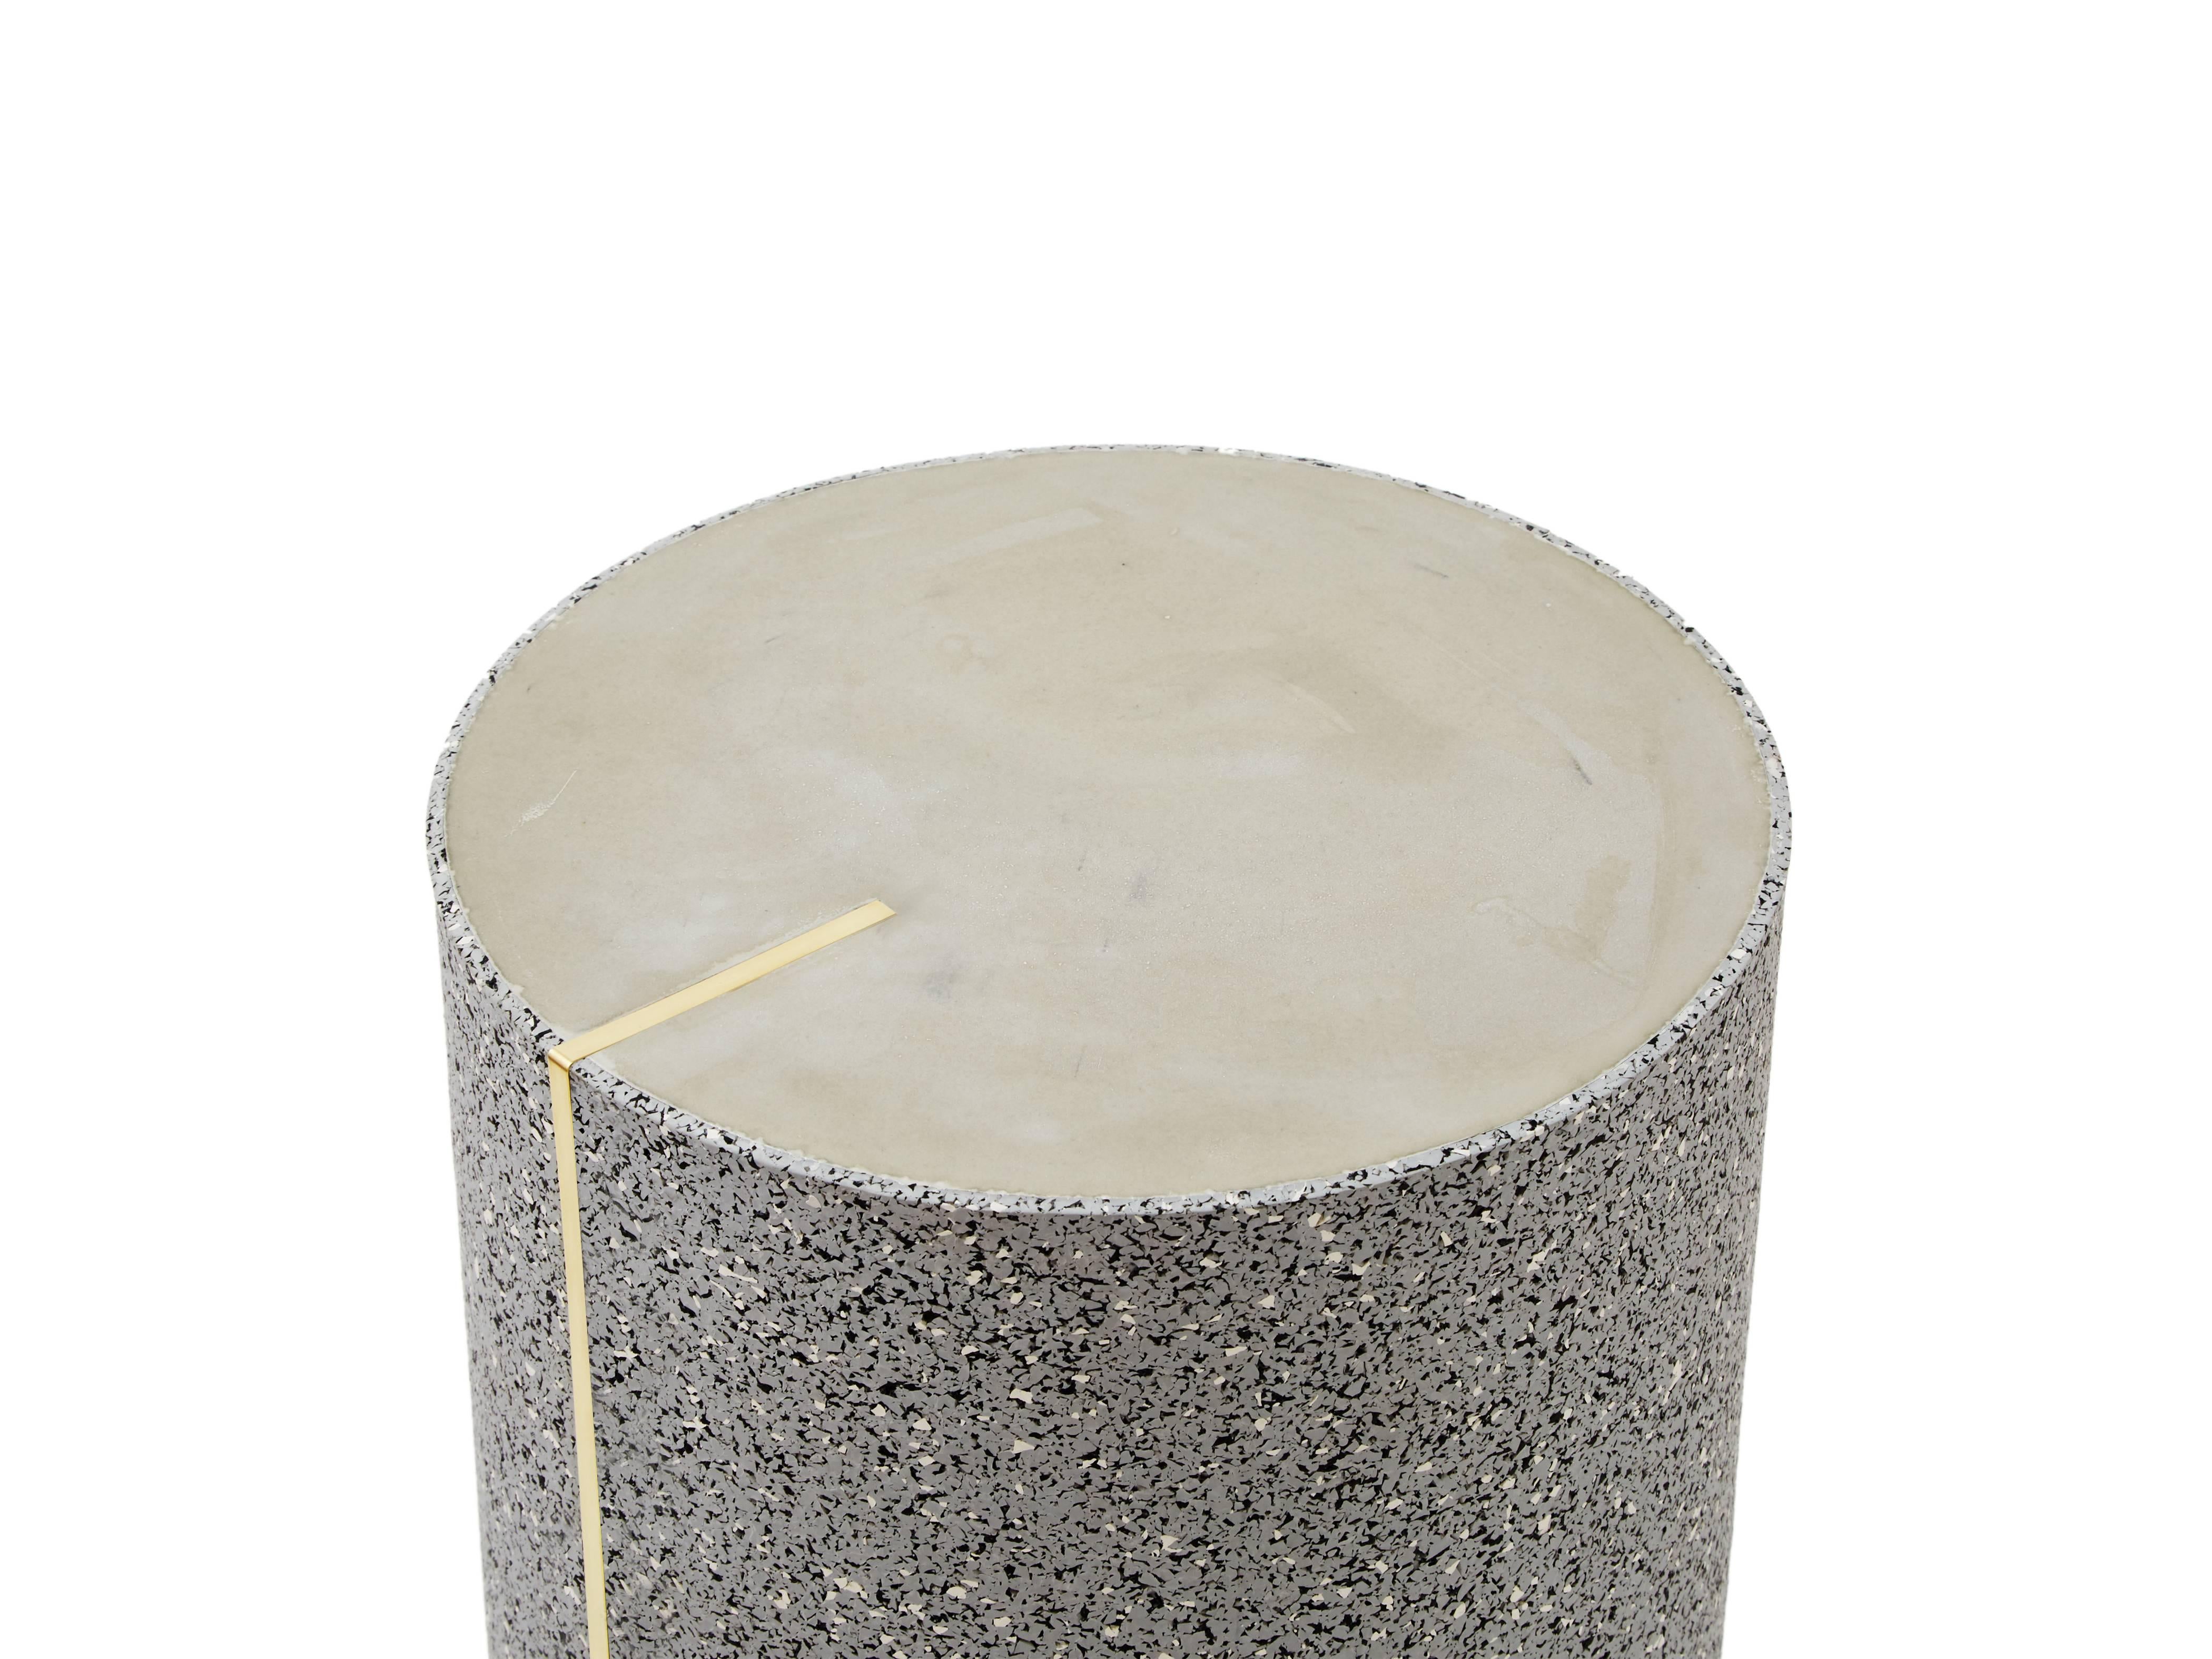 Rubber and concrete side table with a brass inlay created by Slash Objects

Materials: Rubber Exterior in Gris, Concrete Surface, Brass inlay

 